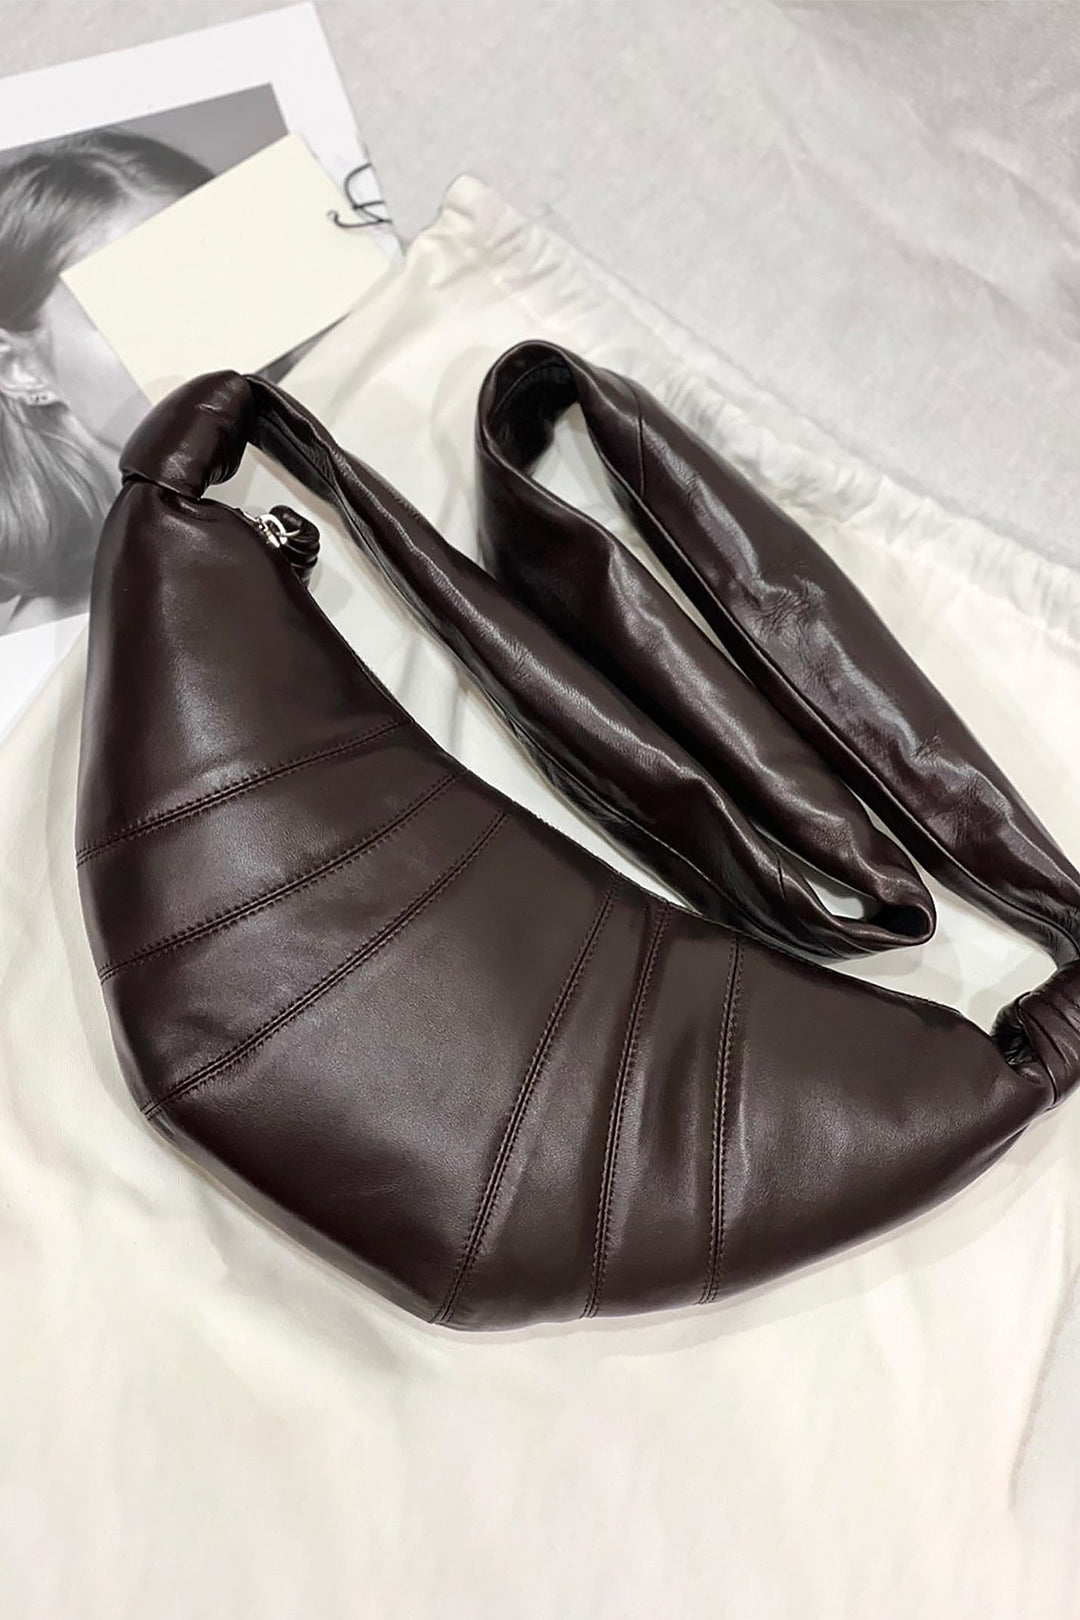 Knotted Faux Leather Cross-body Croissant Bag